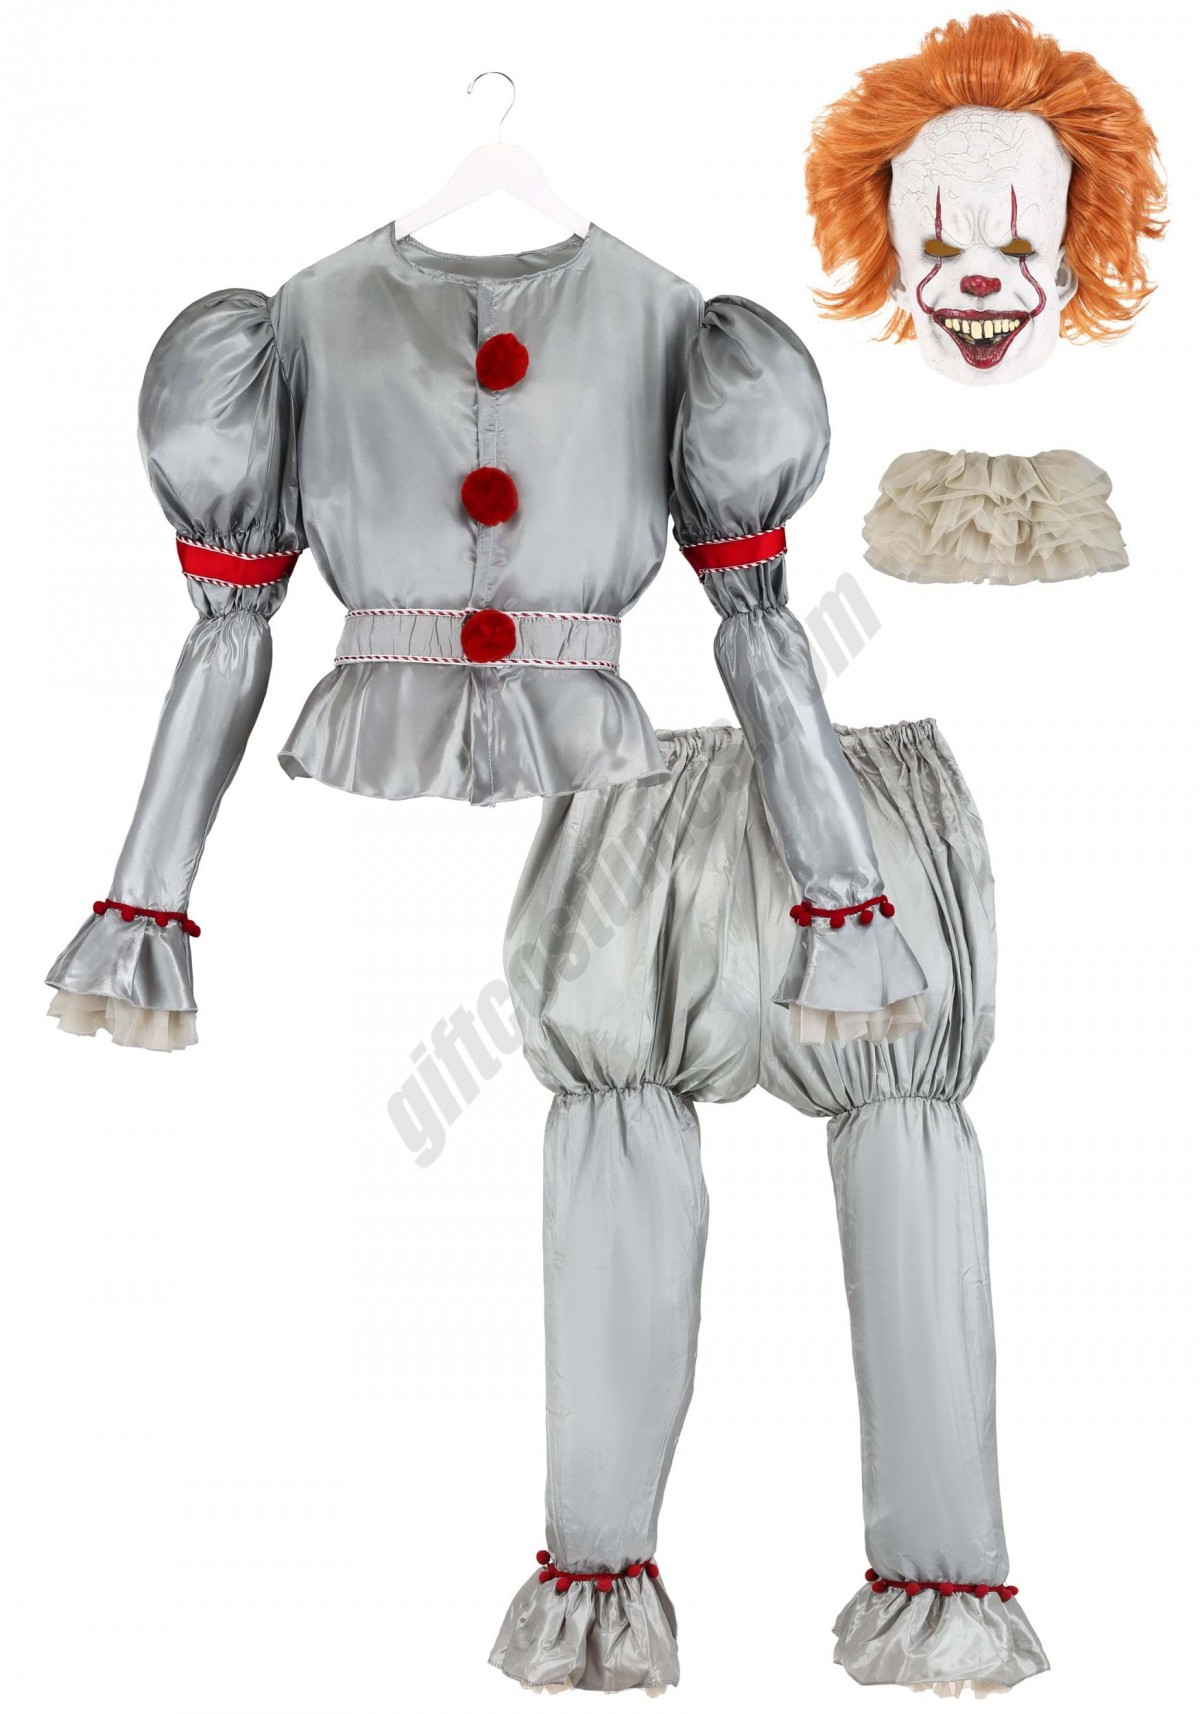 Grand Heritage Pennywise Movie Adult Costume - Men's - -2